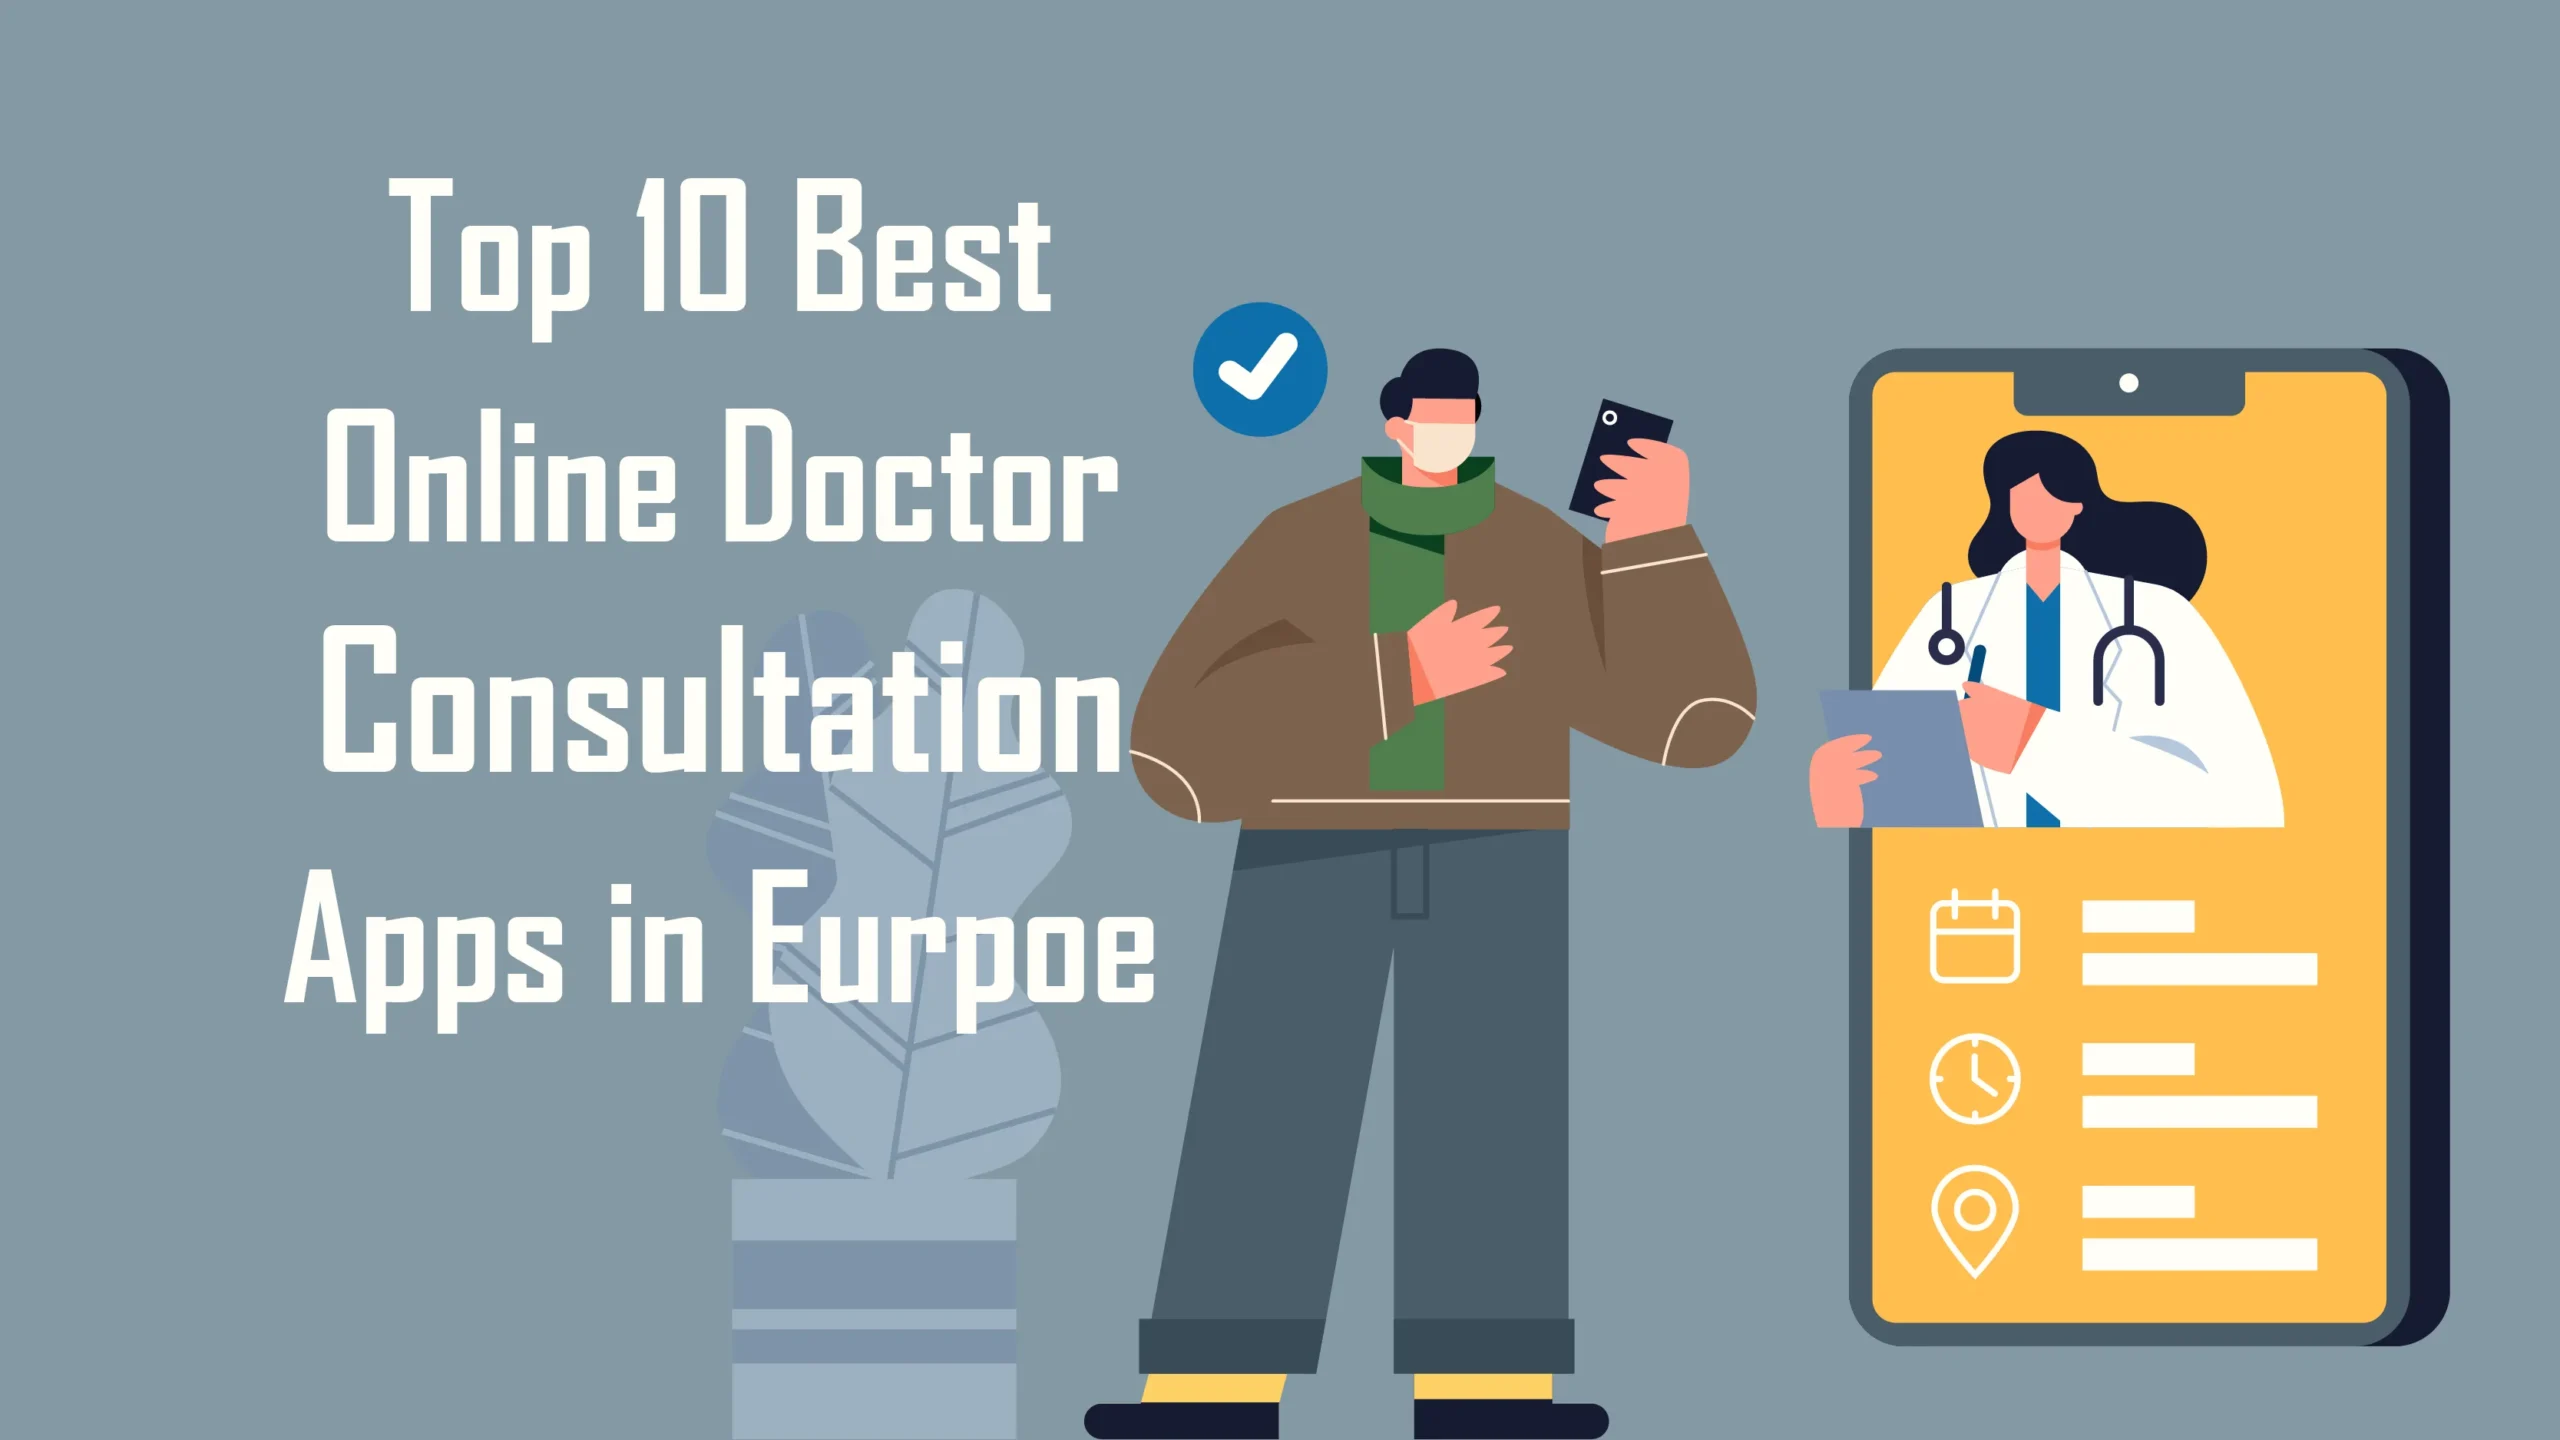 Europe's doctor apps, compared